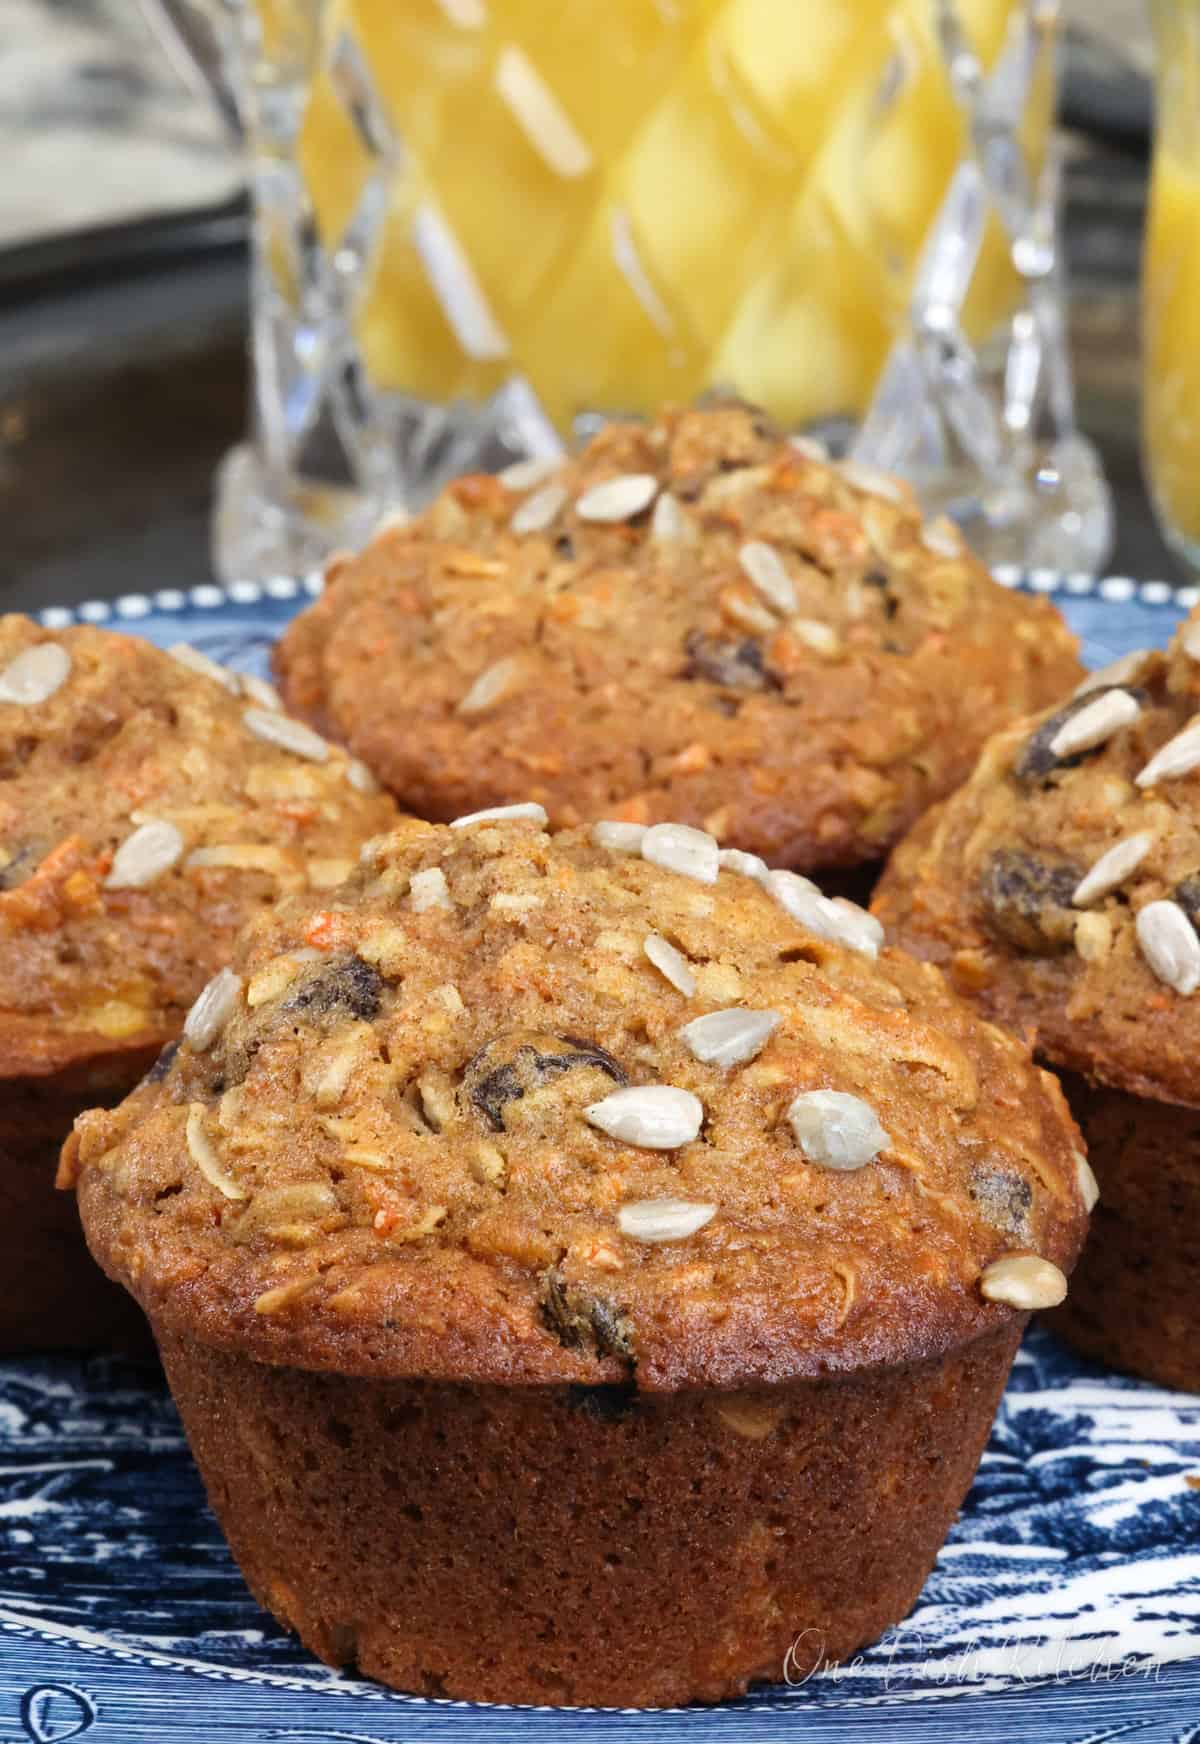 four morning glory muffins on a blue plate next to a pitcher of orange juice